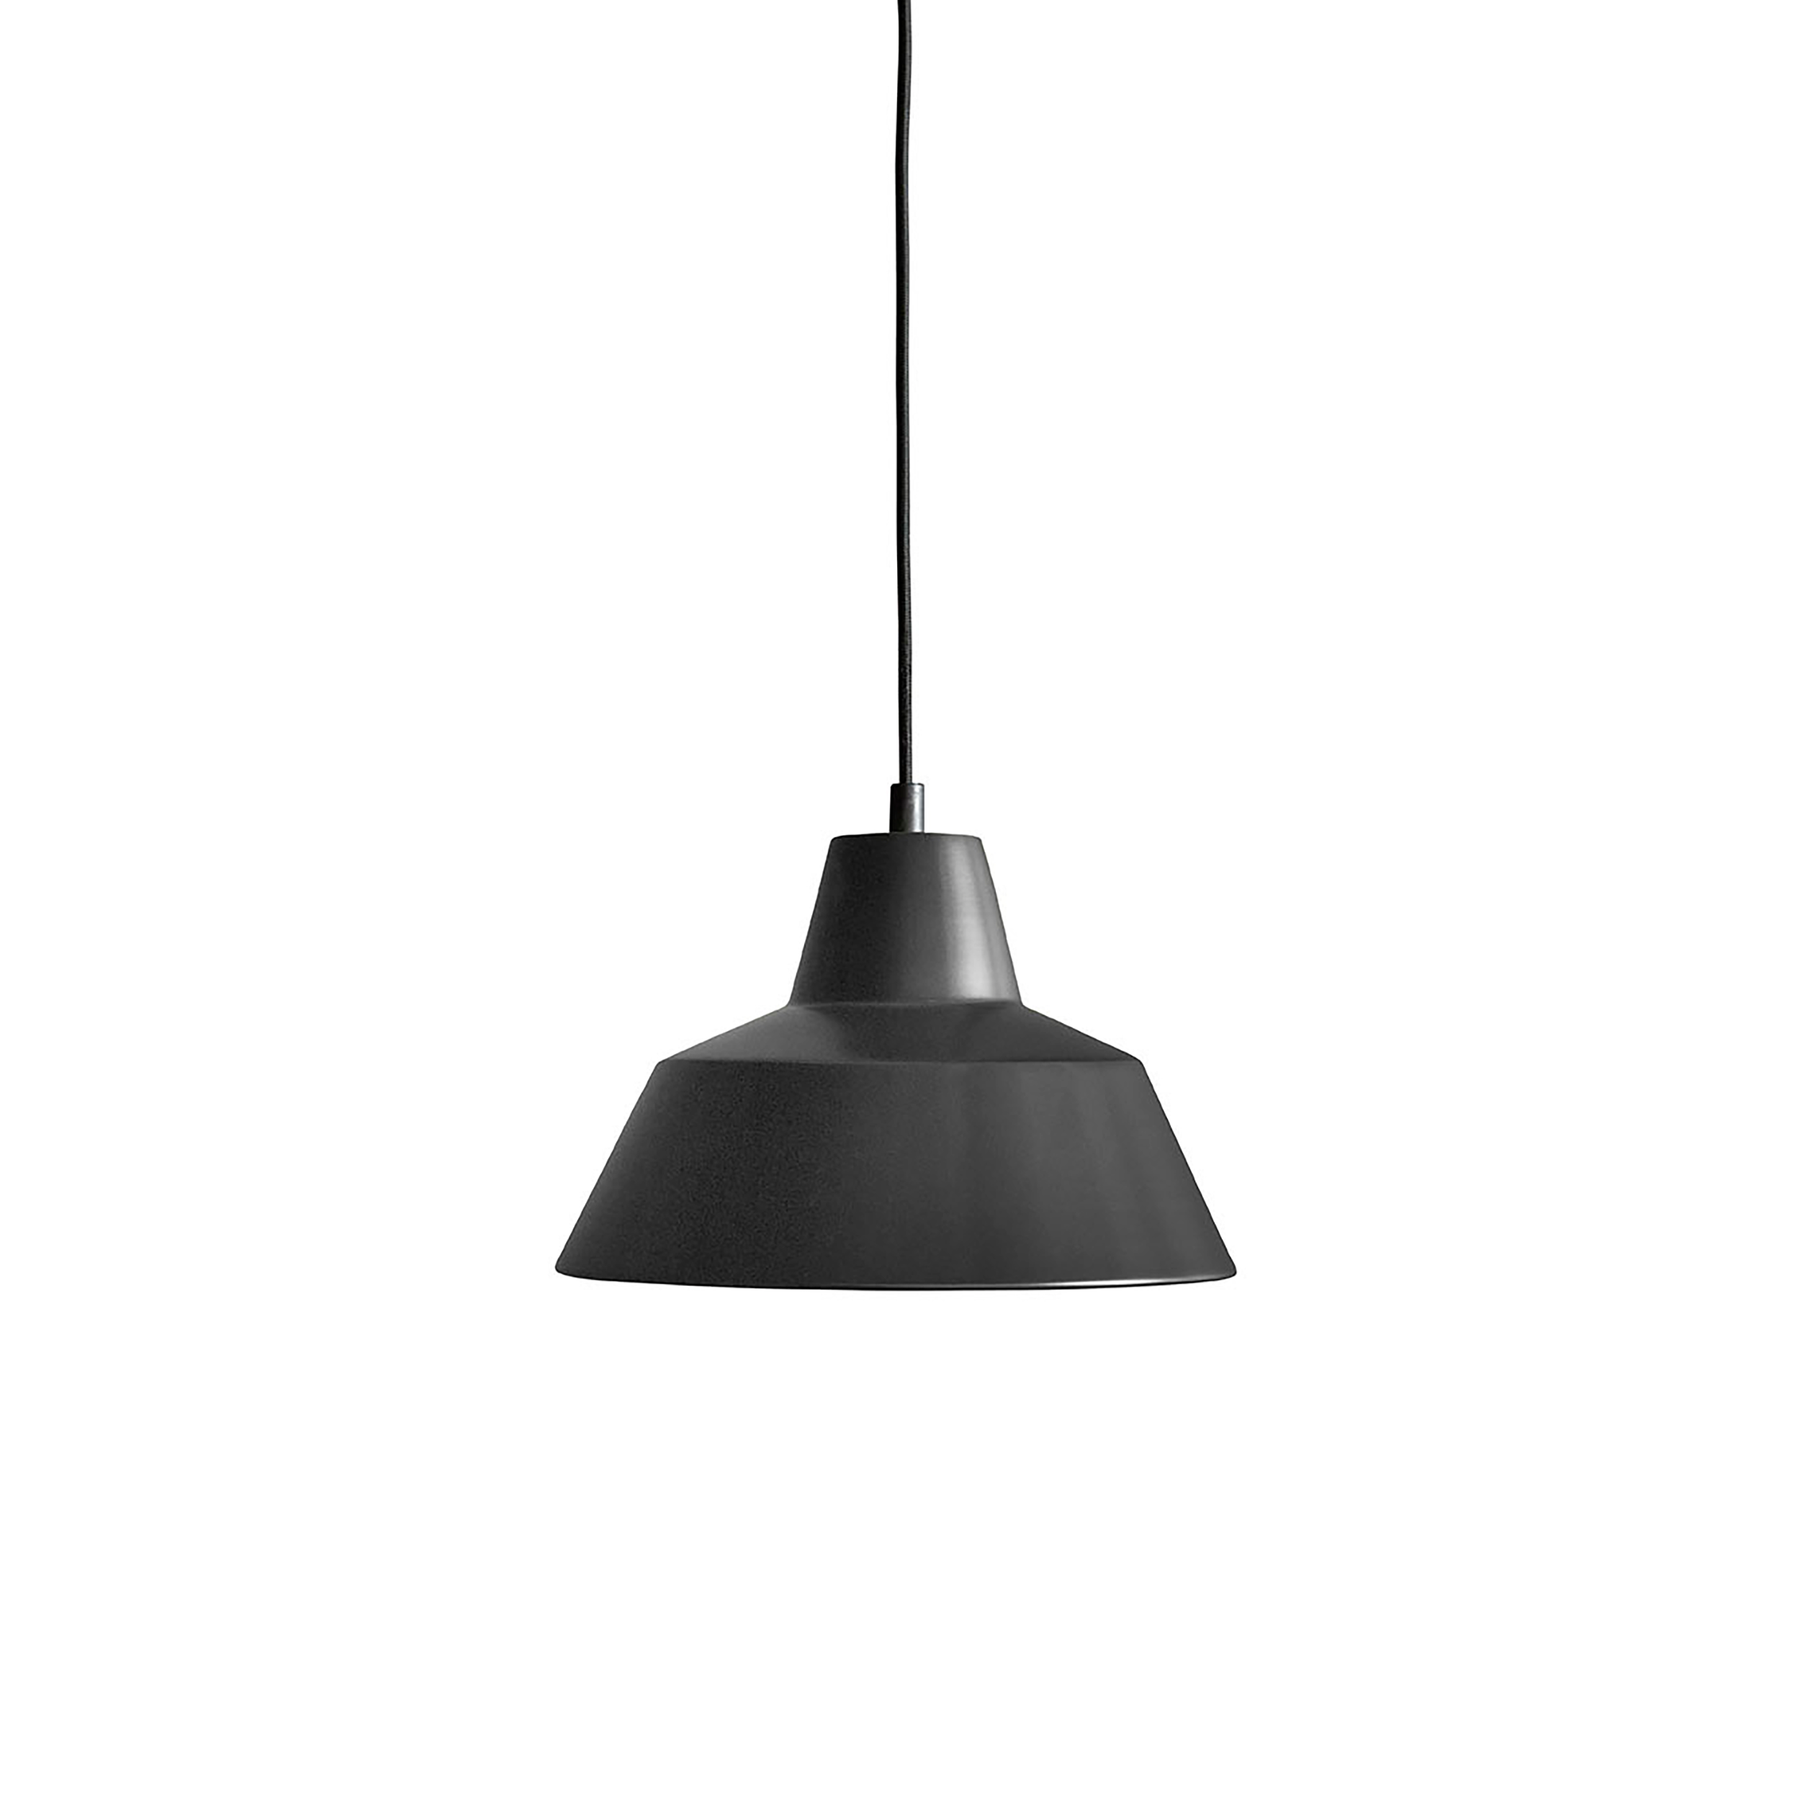 Made by Hand, Workshop Pendant W2, Matte Black